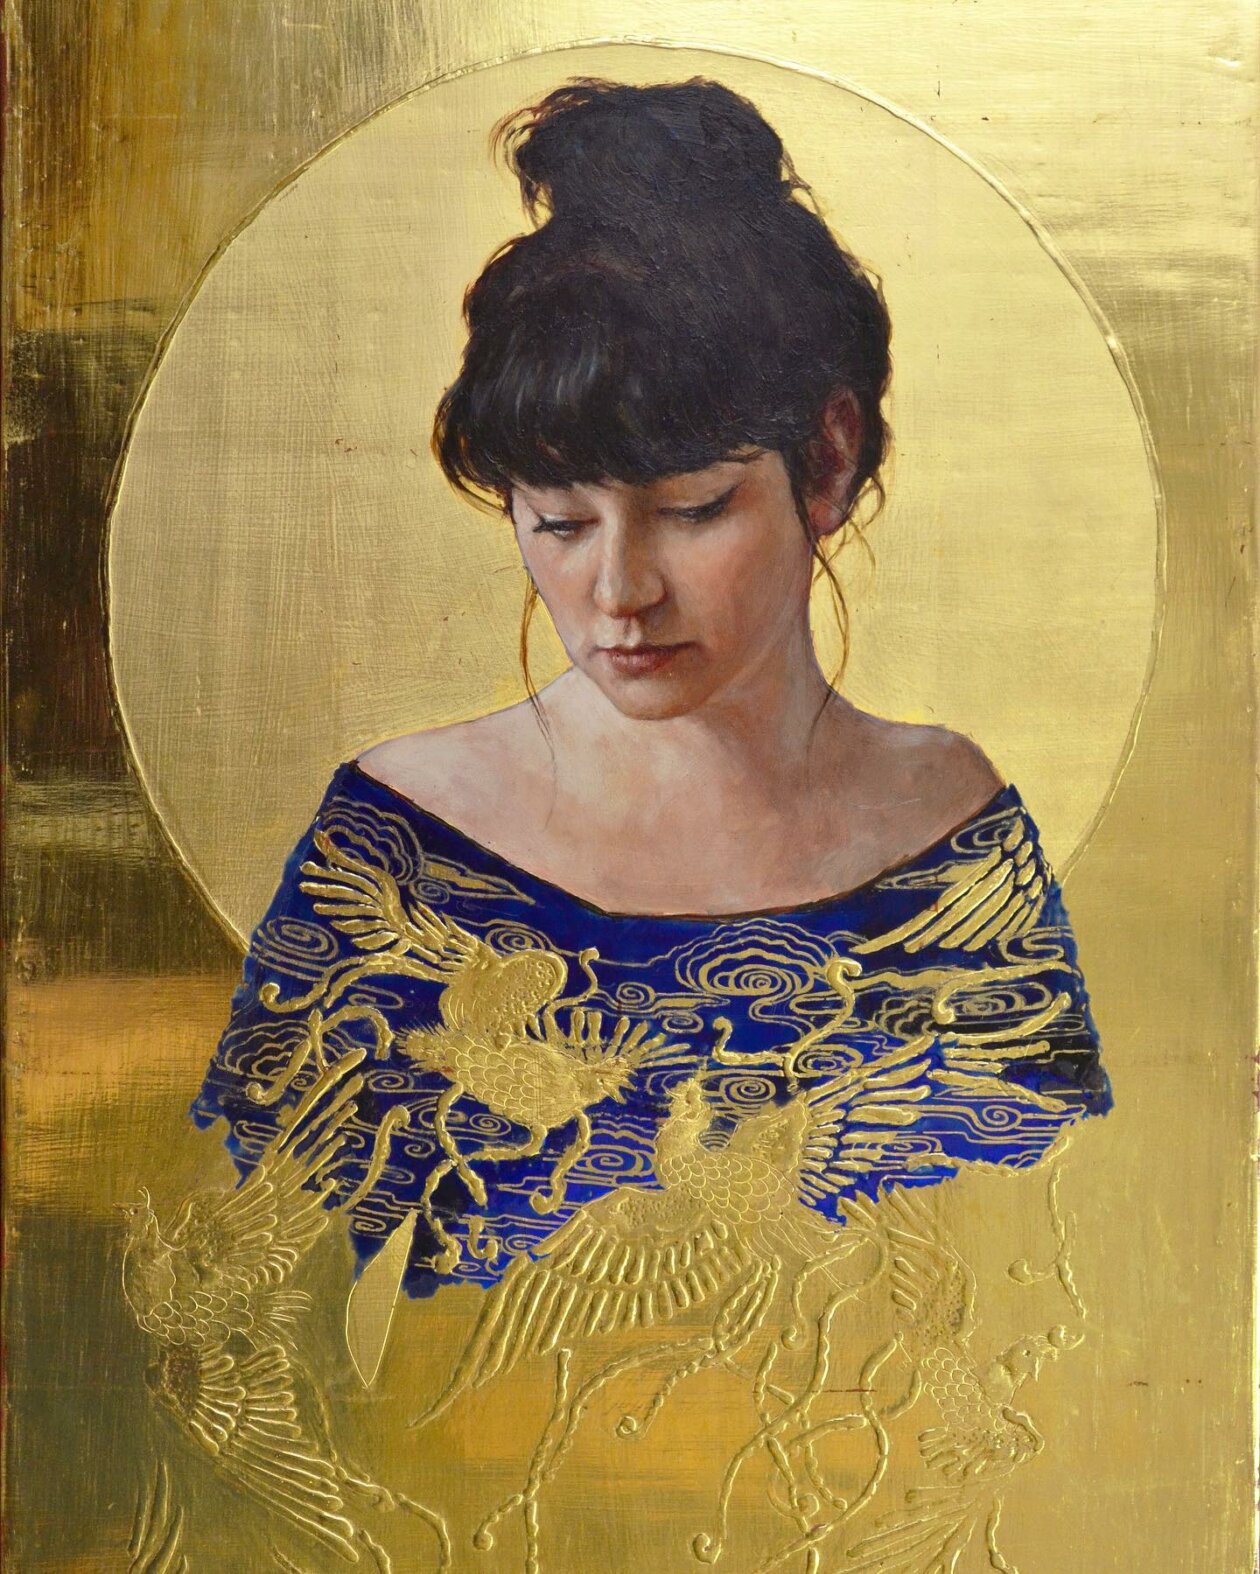 Realistic Figurative Paintings With Gold Ornaments By Stephanie Rew (14)